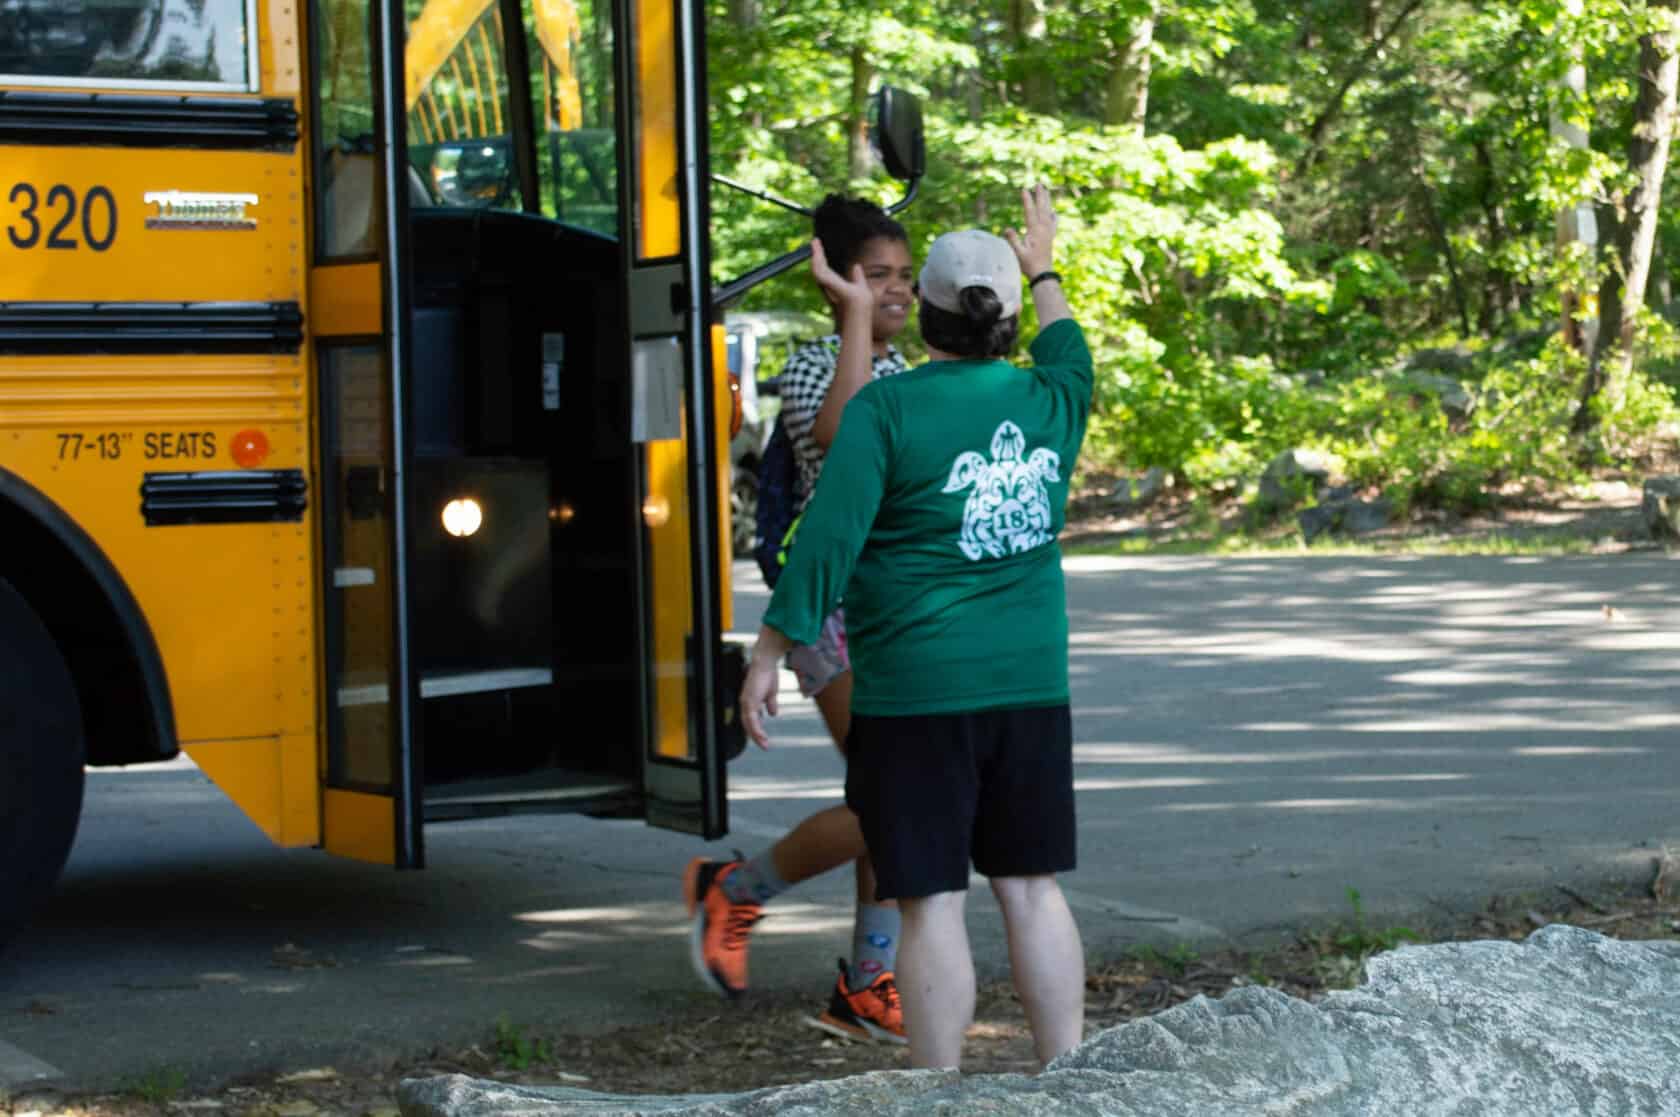 Staff member giving high-five to kid walking off the bus.